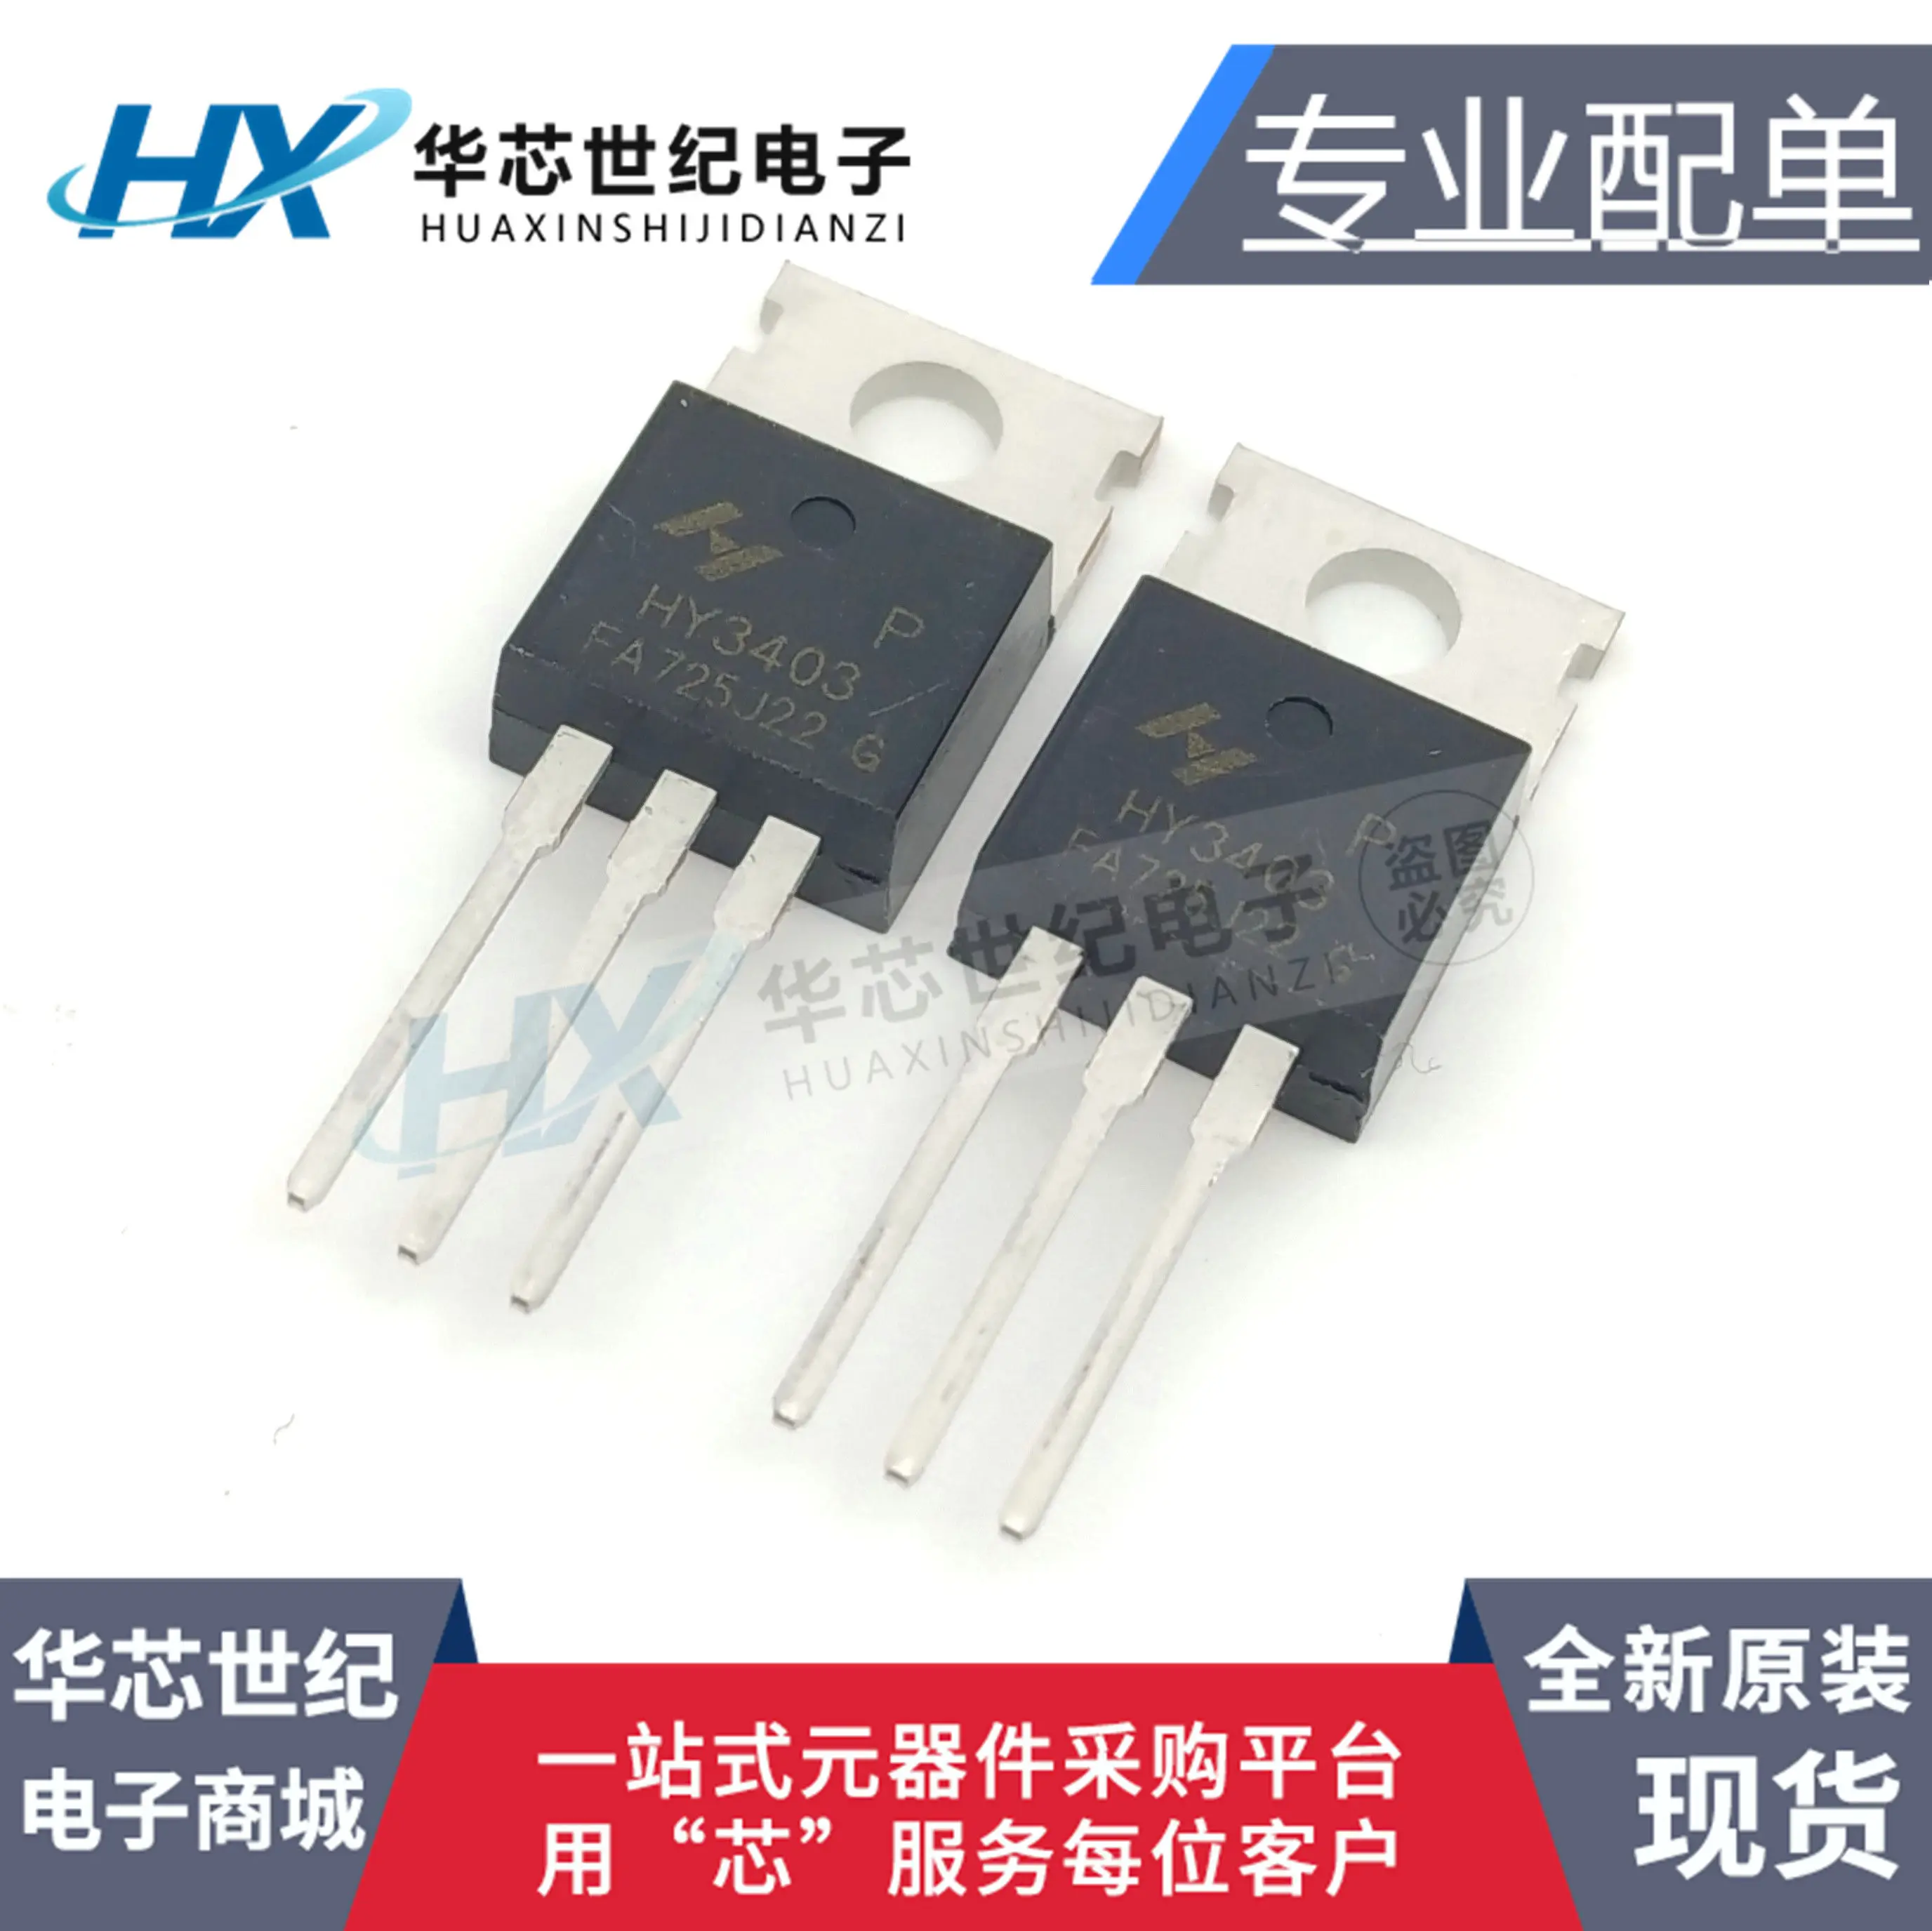 

30pcs original new HY3403P field-effect transistor 3403P 30V 100A TO-220 N channel